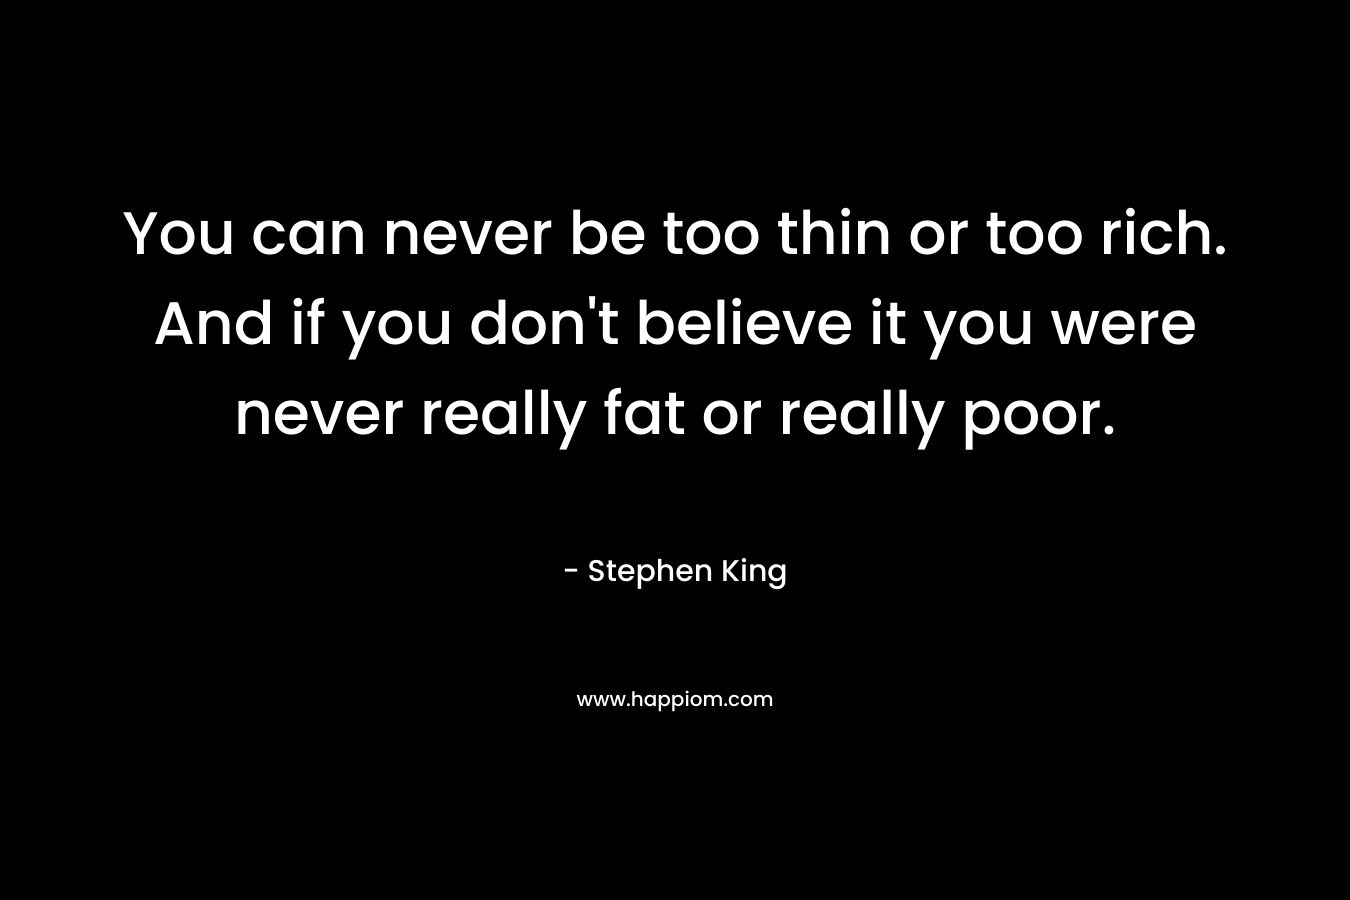 You can never be too thin or too rich. And if you don't believe it you were never really fat or really poor.